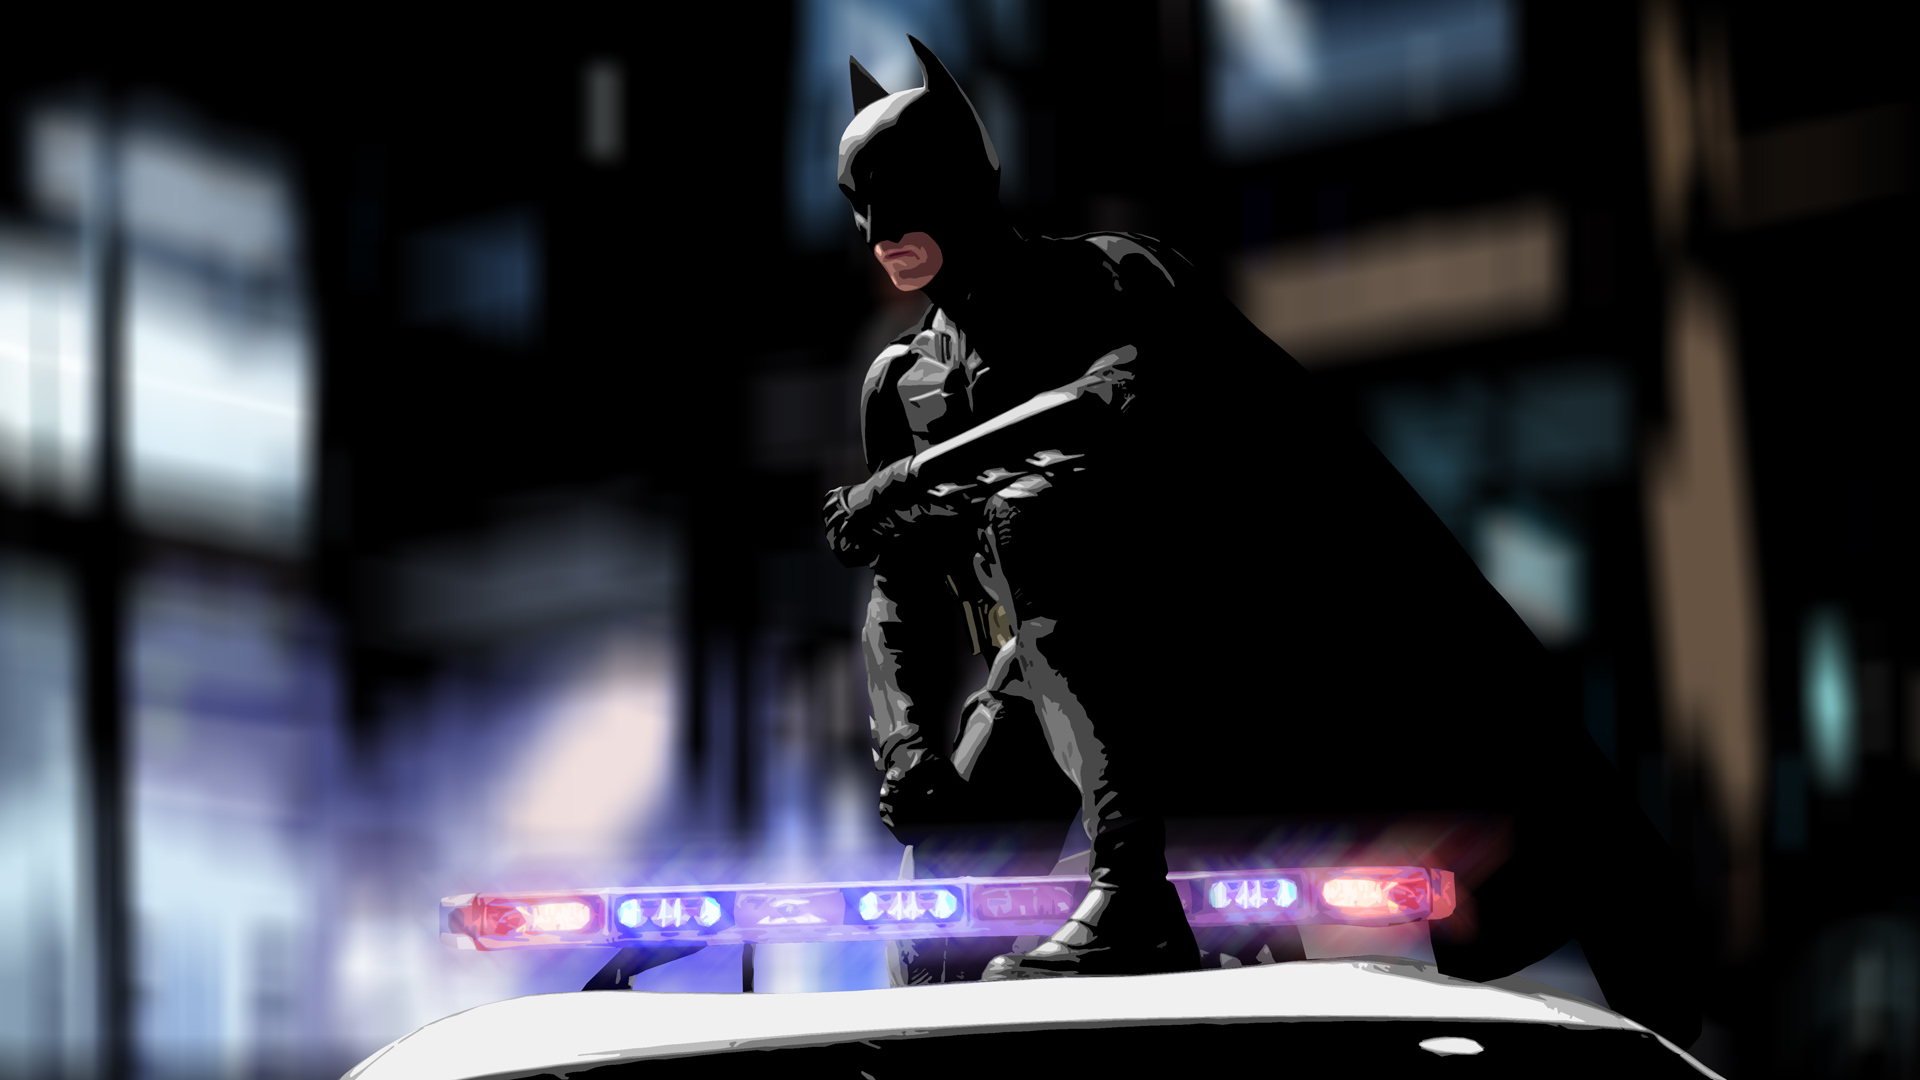 The Dark Knight download the last version for ipod